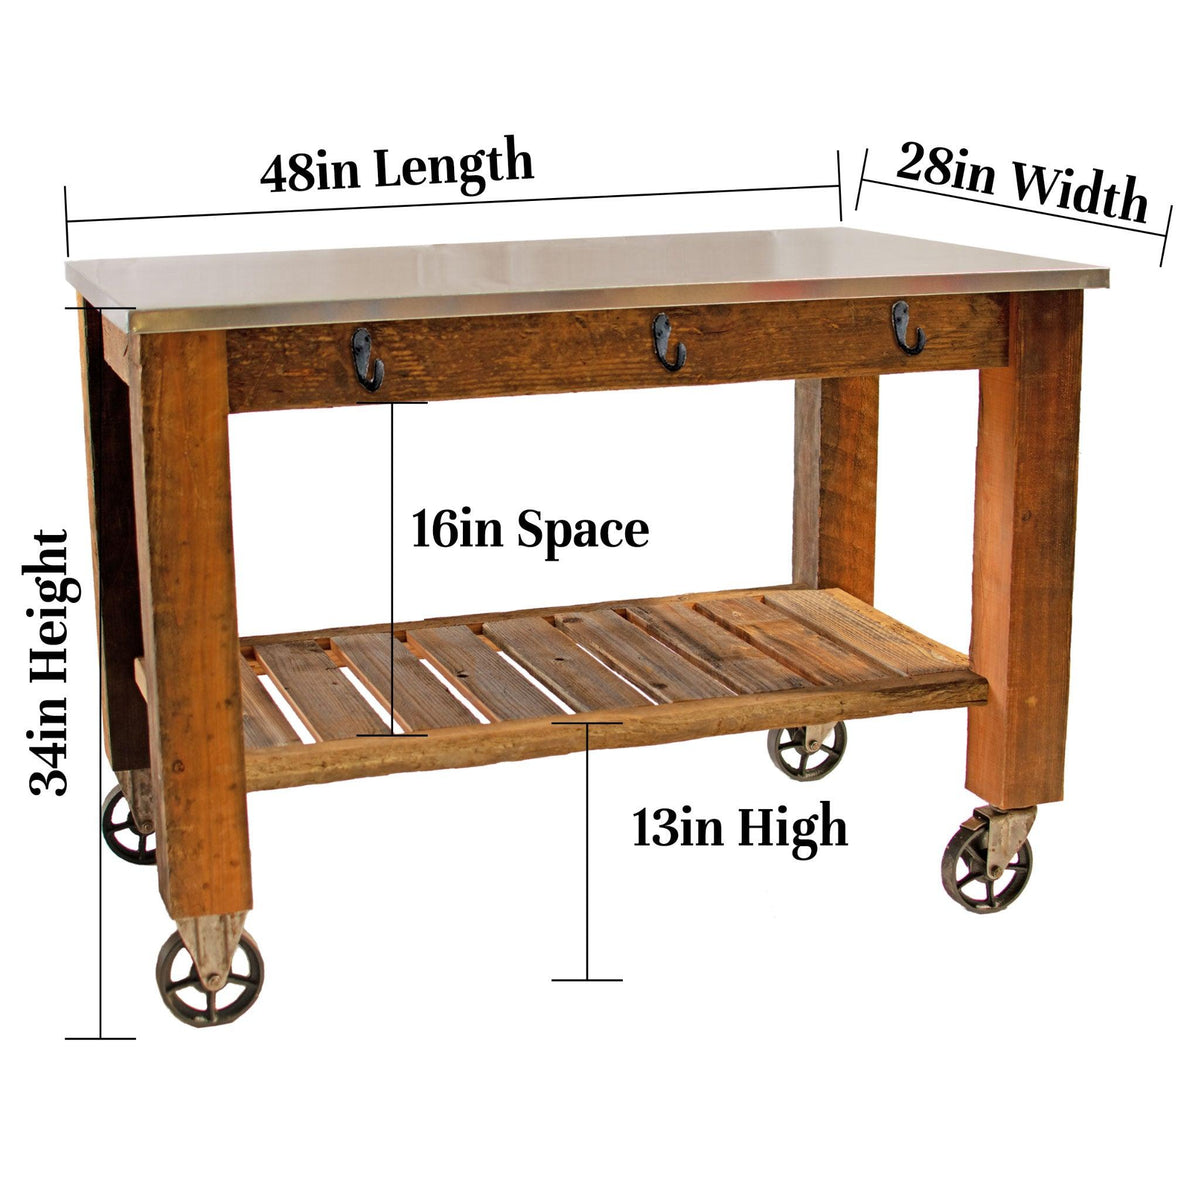 Dimensions of Lee Display's Potting Table without the top shelf included.